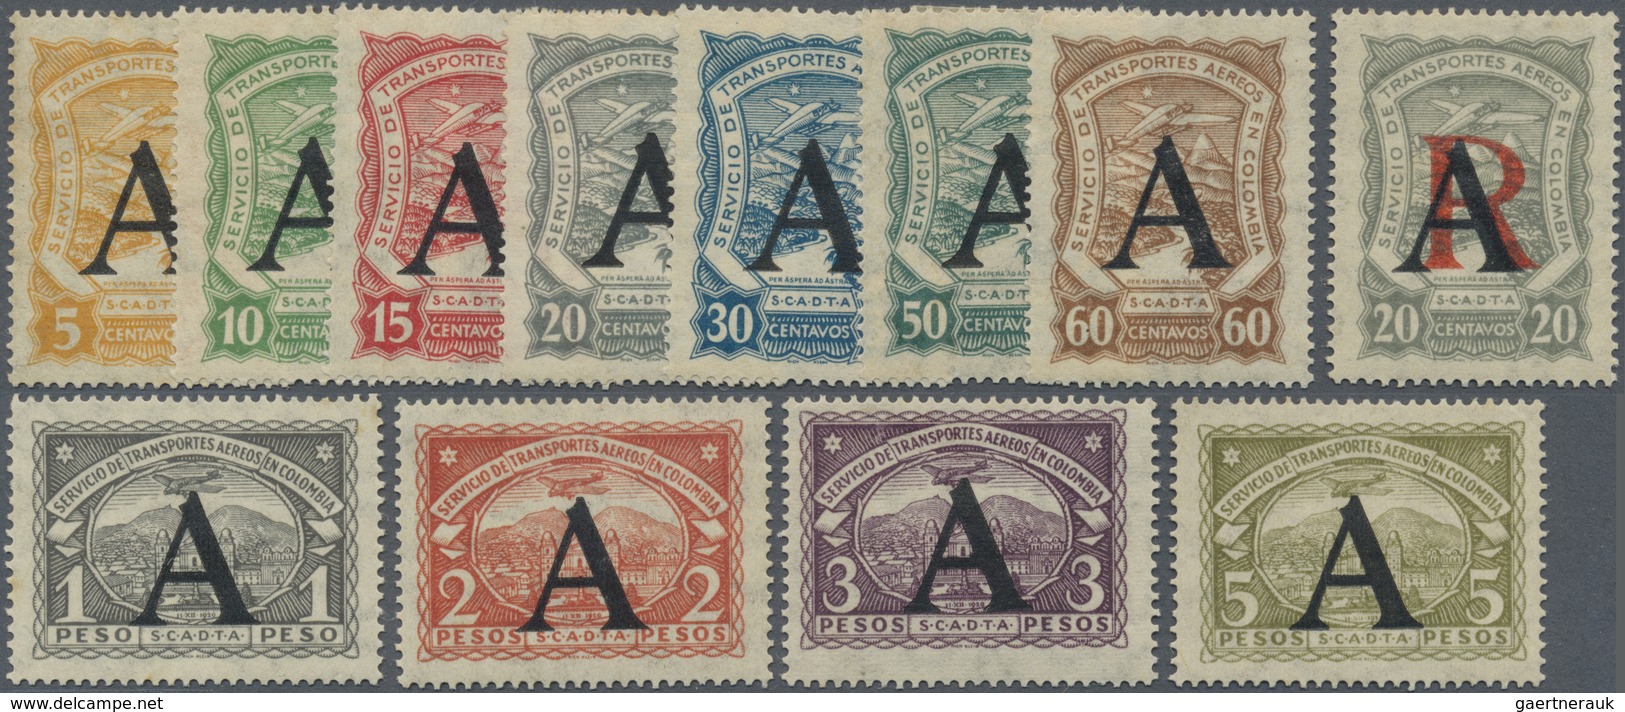 * SCADTA - Länder-Aufdrucke: 1923, GERMANY: Colombia Airmail Issue With Black Opt. 'A' Complete Set Of - Avions